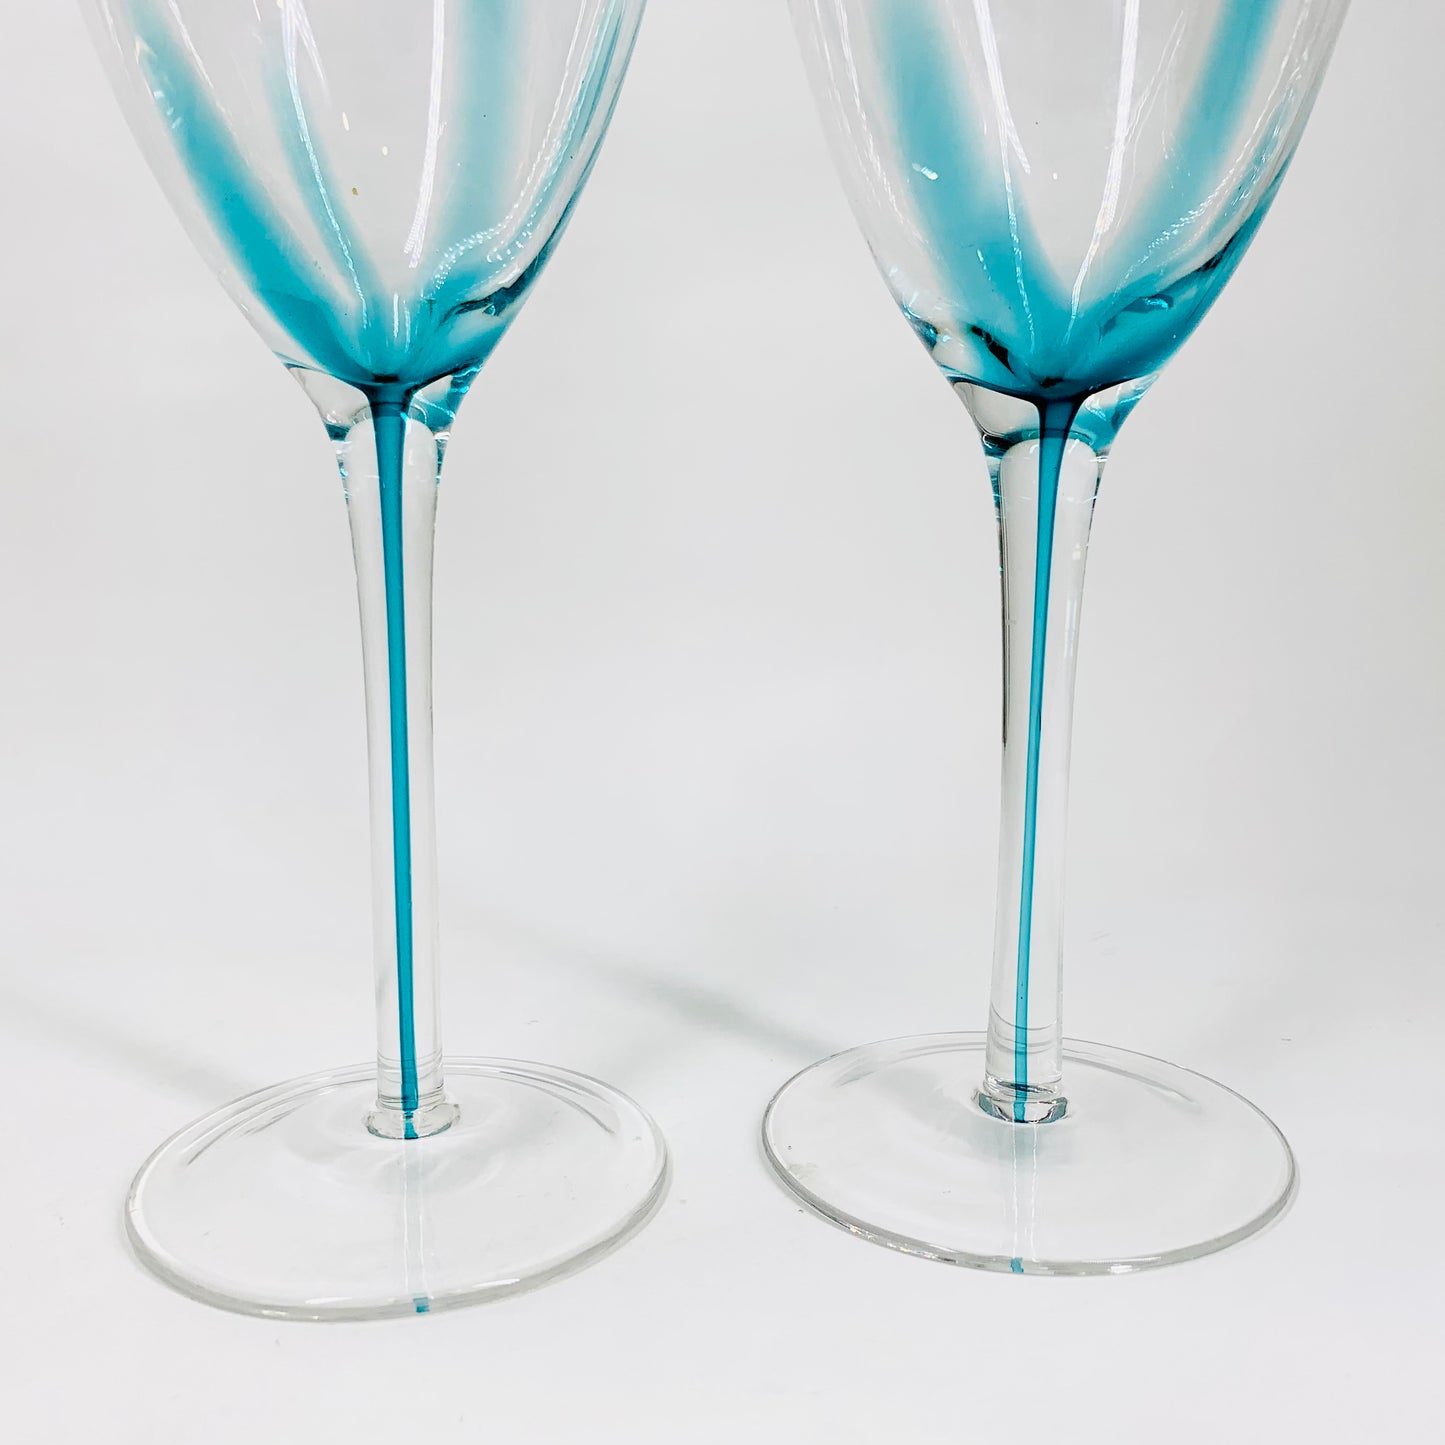 Vintage hand made turquoise art glass wine glasses with encased turquoise ink